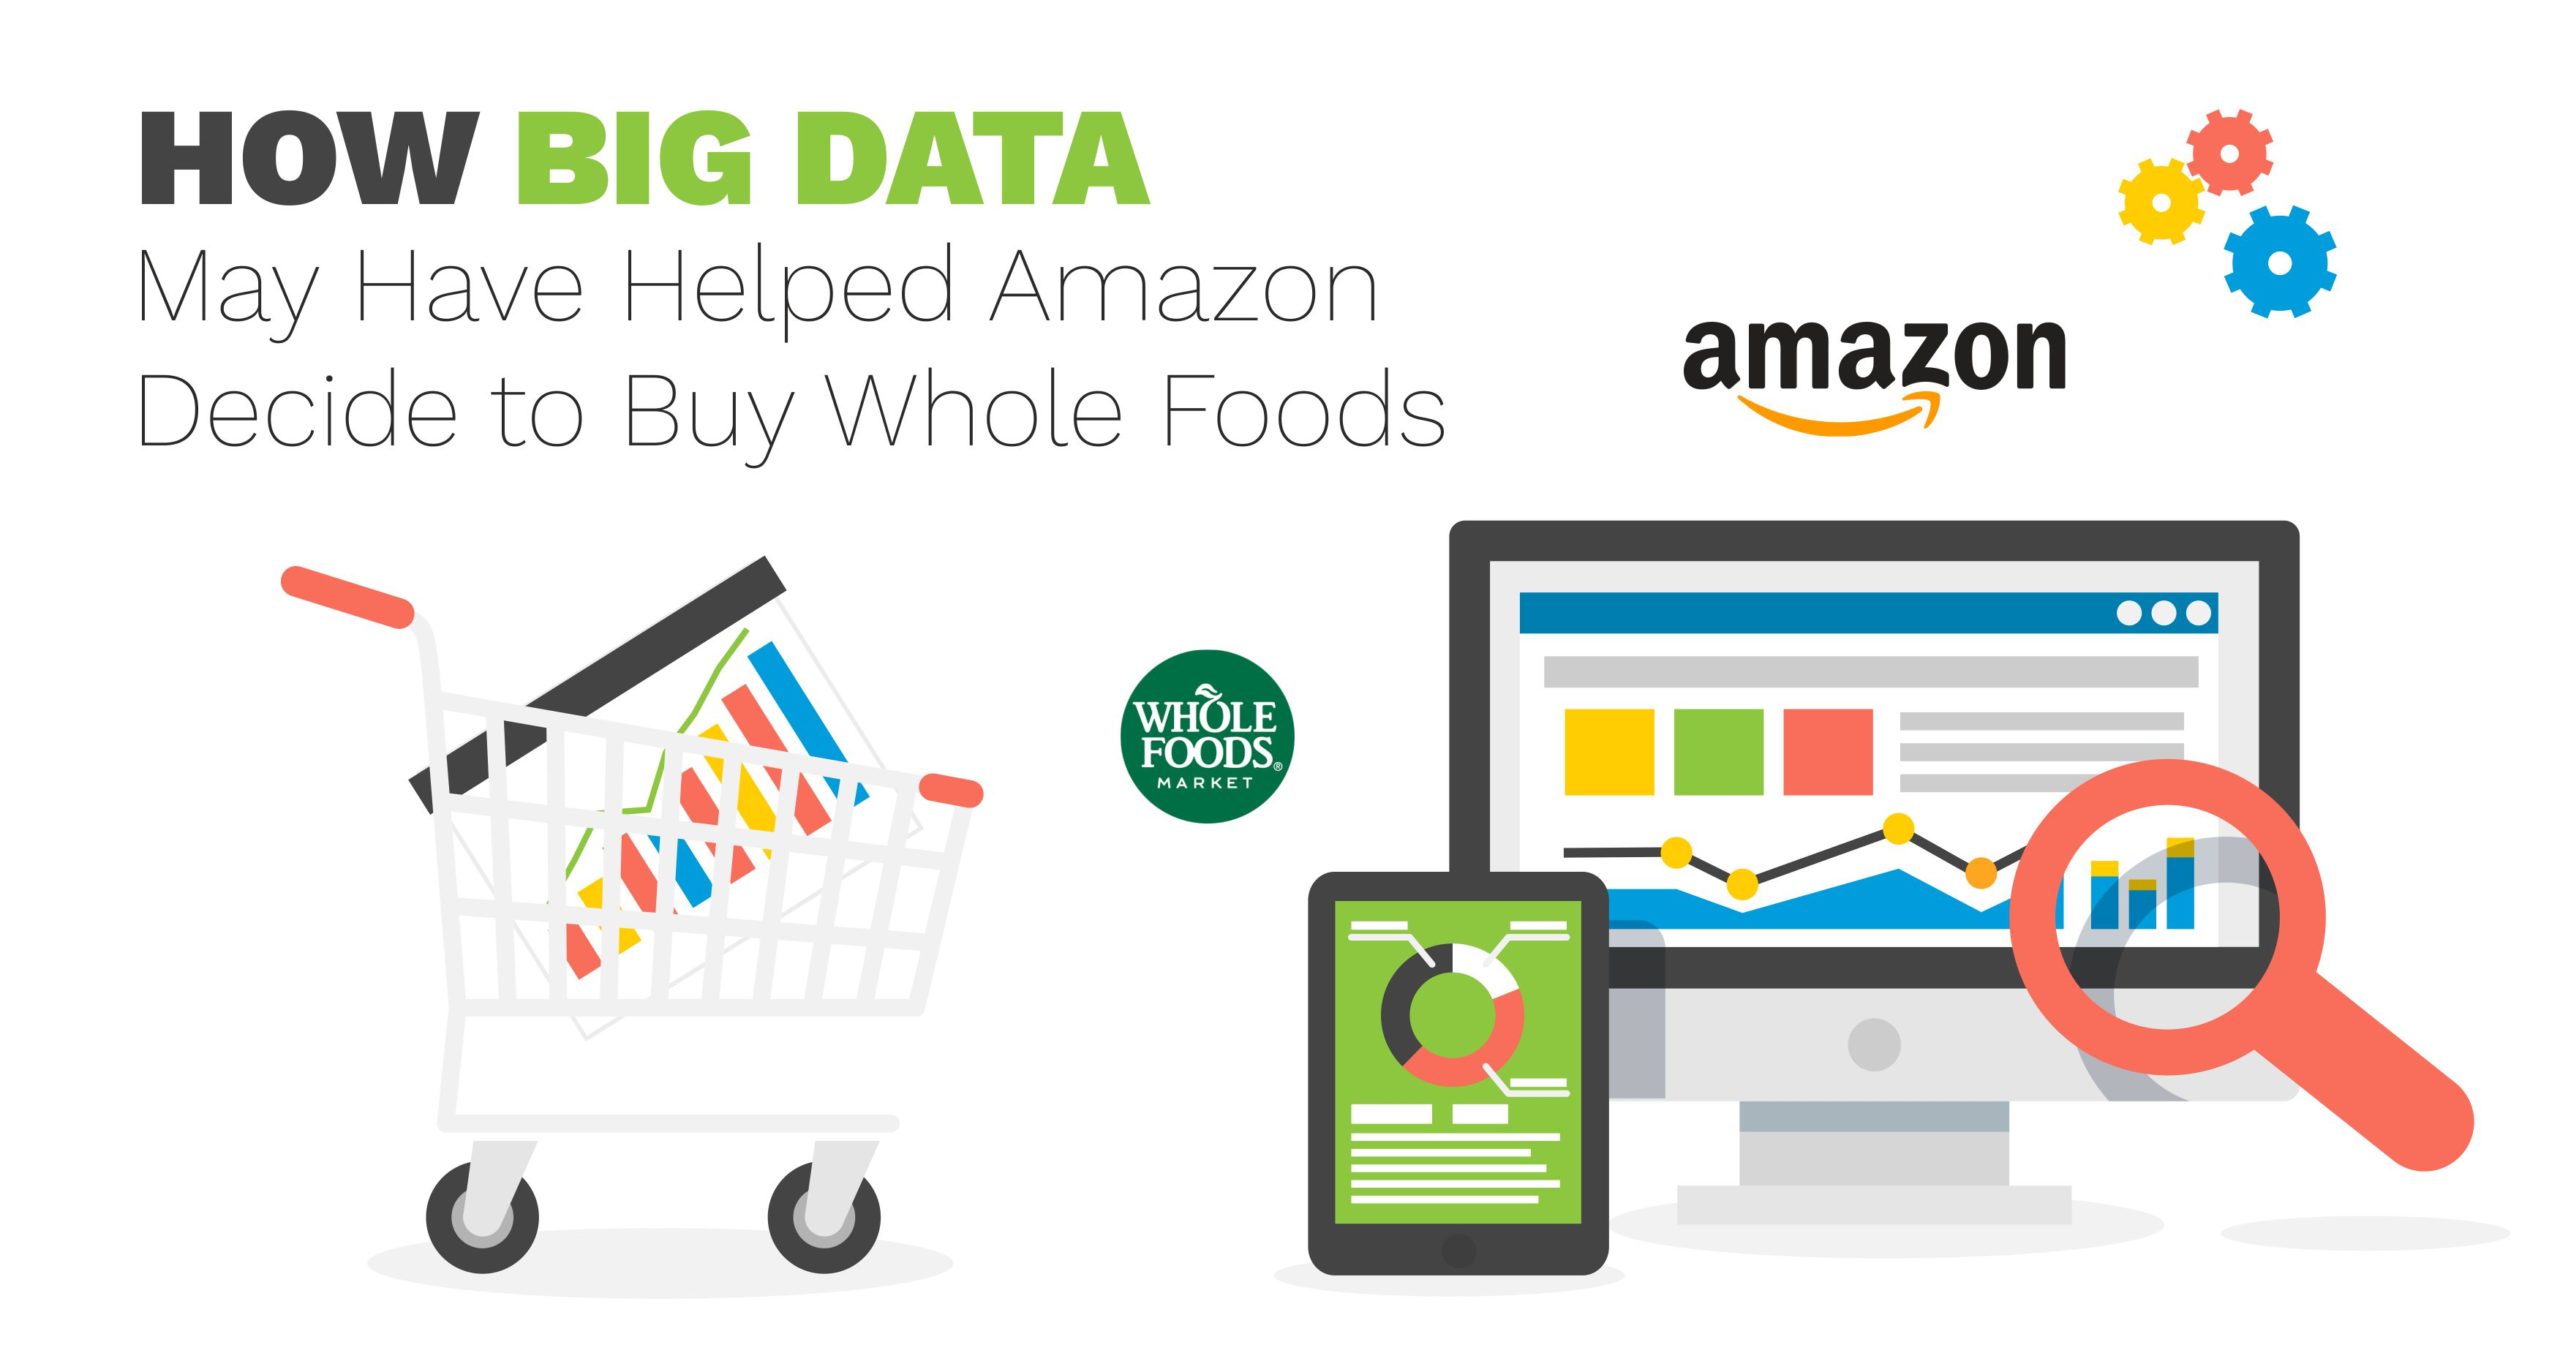 4-How Big Data May Have Helped Amazon Decide to Buy Whole Foods